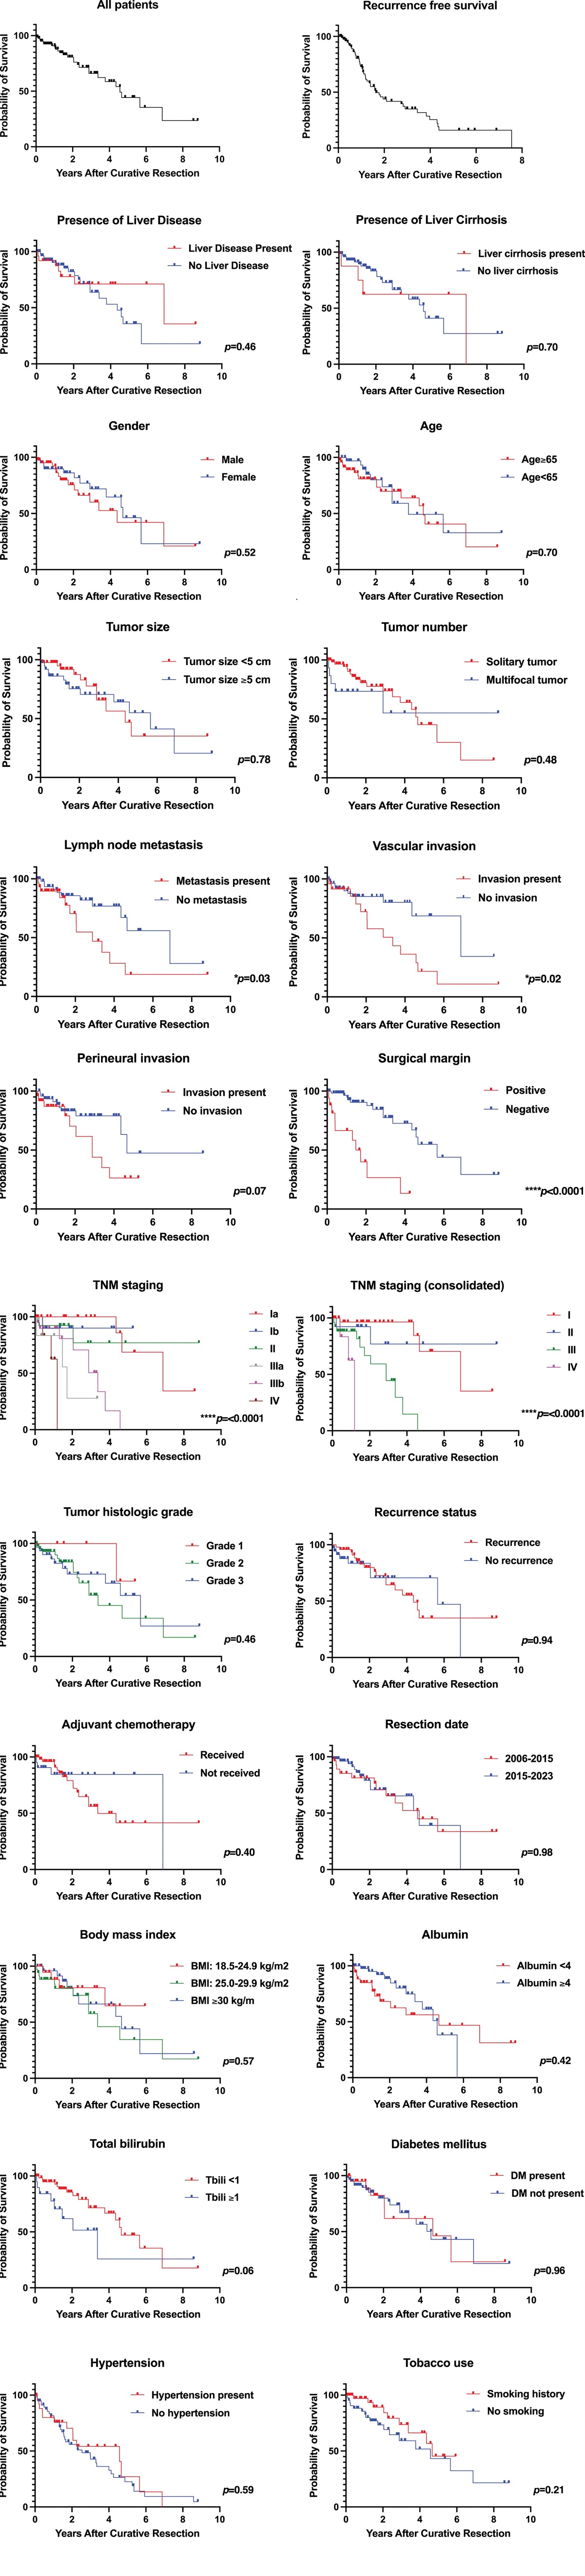 An assessment of risk factors for recurrence and survival for patients undergoing liver resection for intrahepatic cholangiocarcinoma